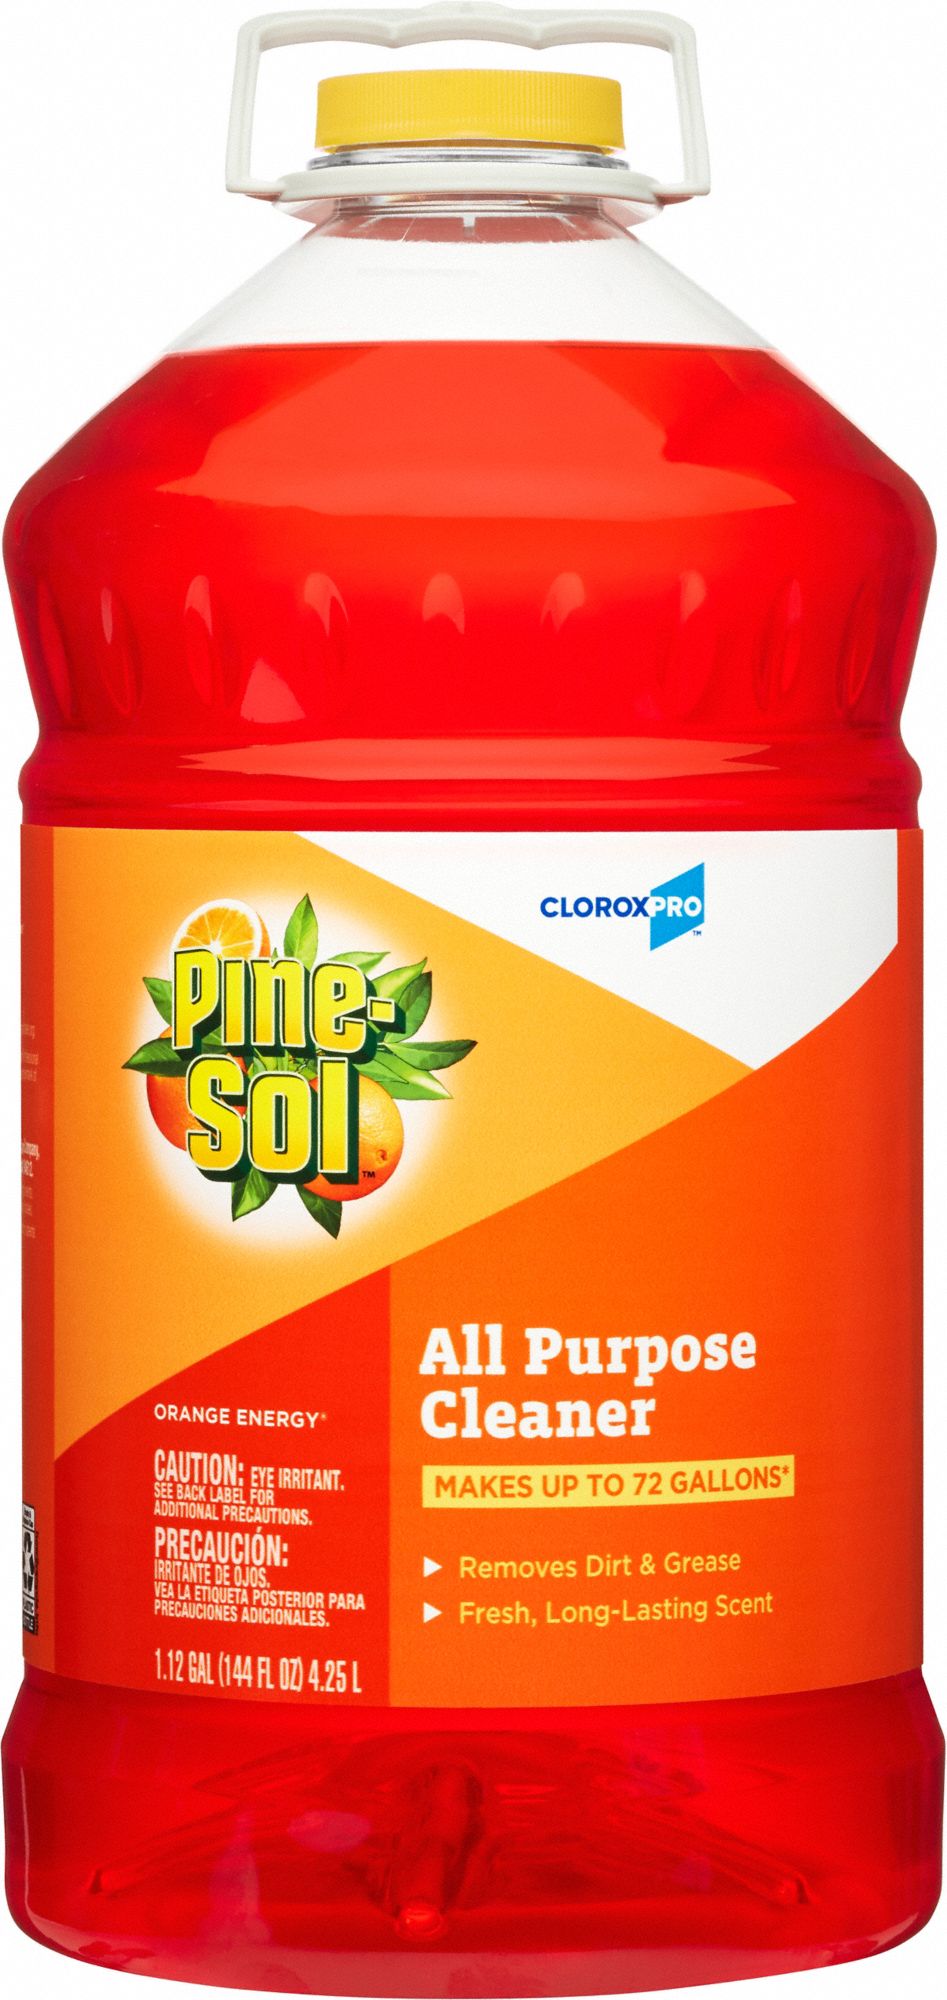 All Purpose Cleaner: Bottle, 144 oz Container Size, Ready to Use, Orange, Alkaline, 3 PK